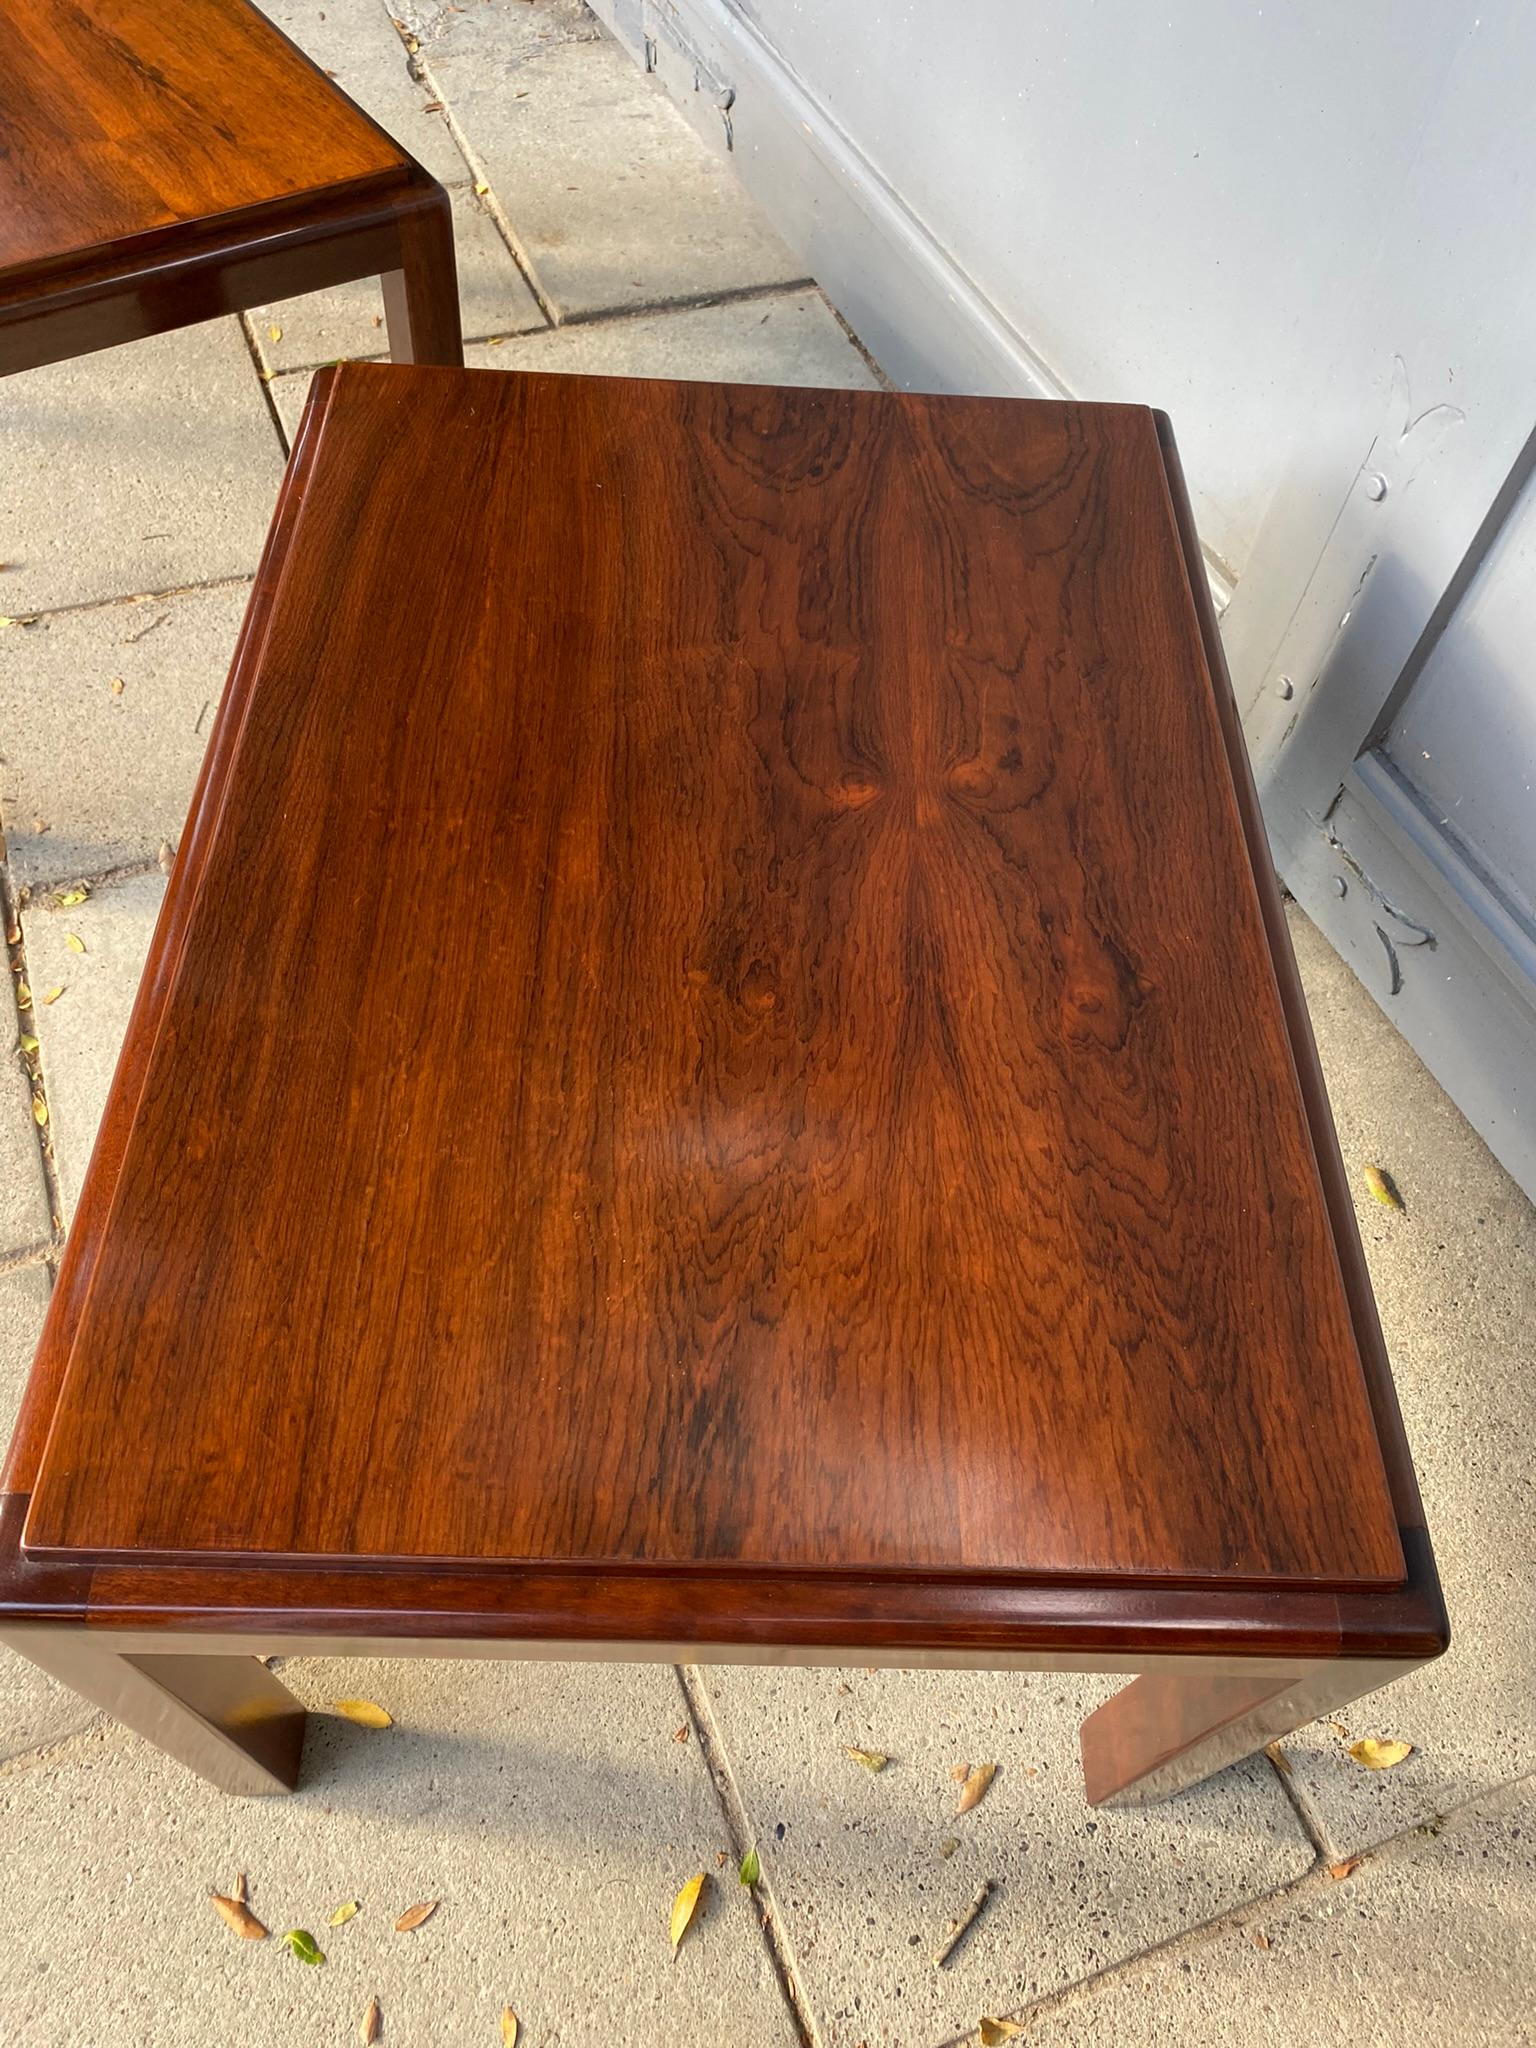 Pair of Mid Century Rosewood Side / Sofa / End Tables, French, 1970s

A stunning pair of rosewood tables from the 1970s boasts an elegant design, perfect as end, side, or sofa table. Great proportions and size. Their sleek lines and rich, warm tones